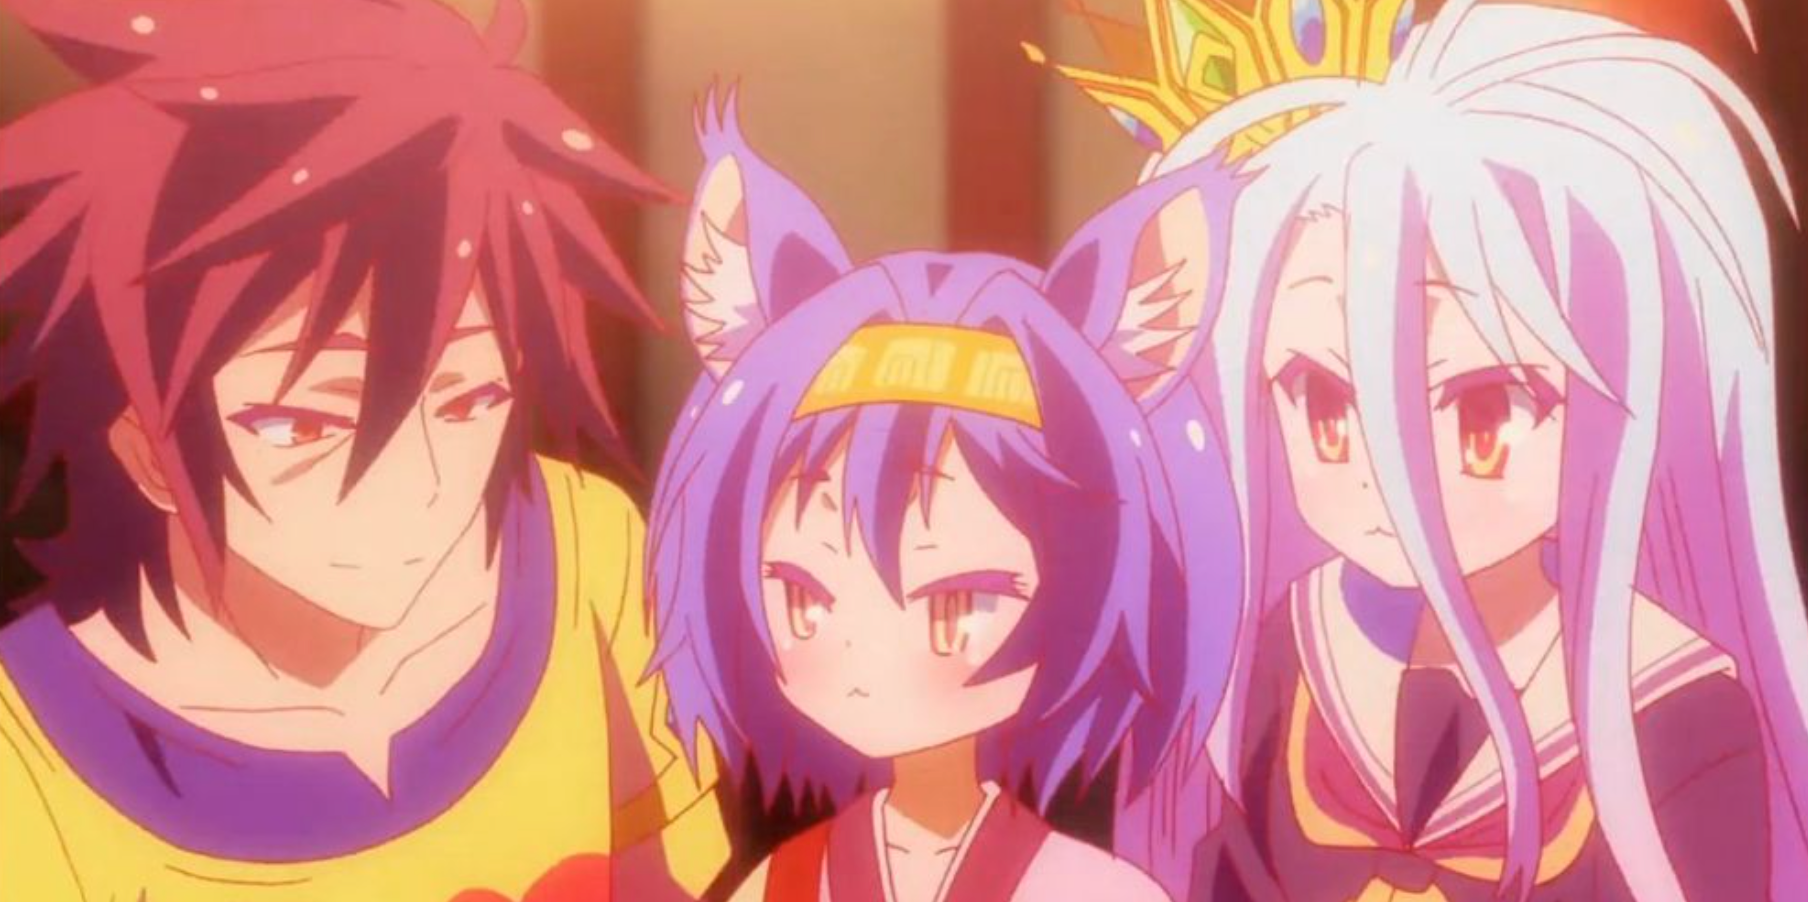 the characters of No Game No Life